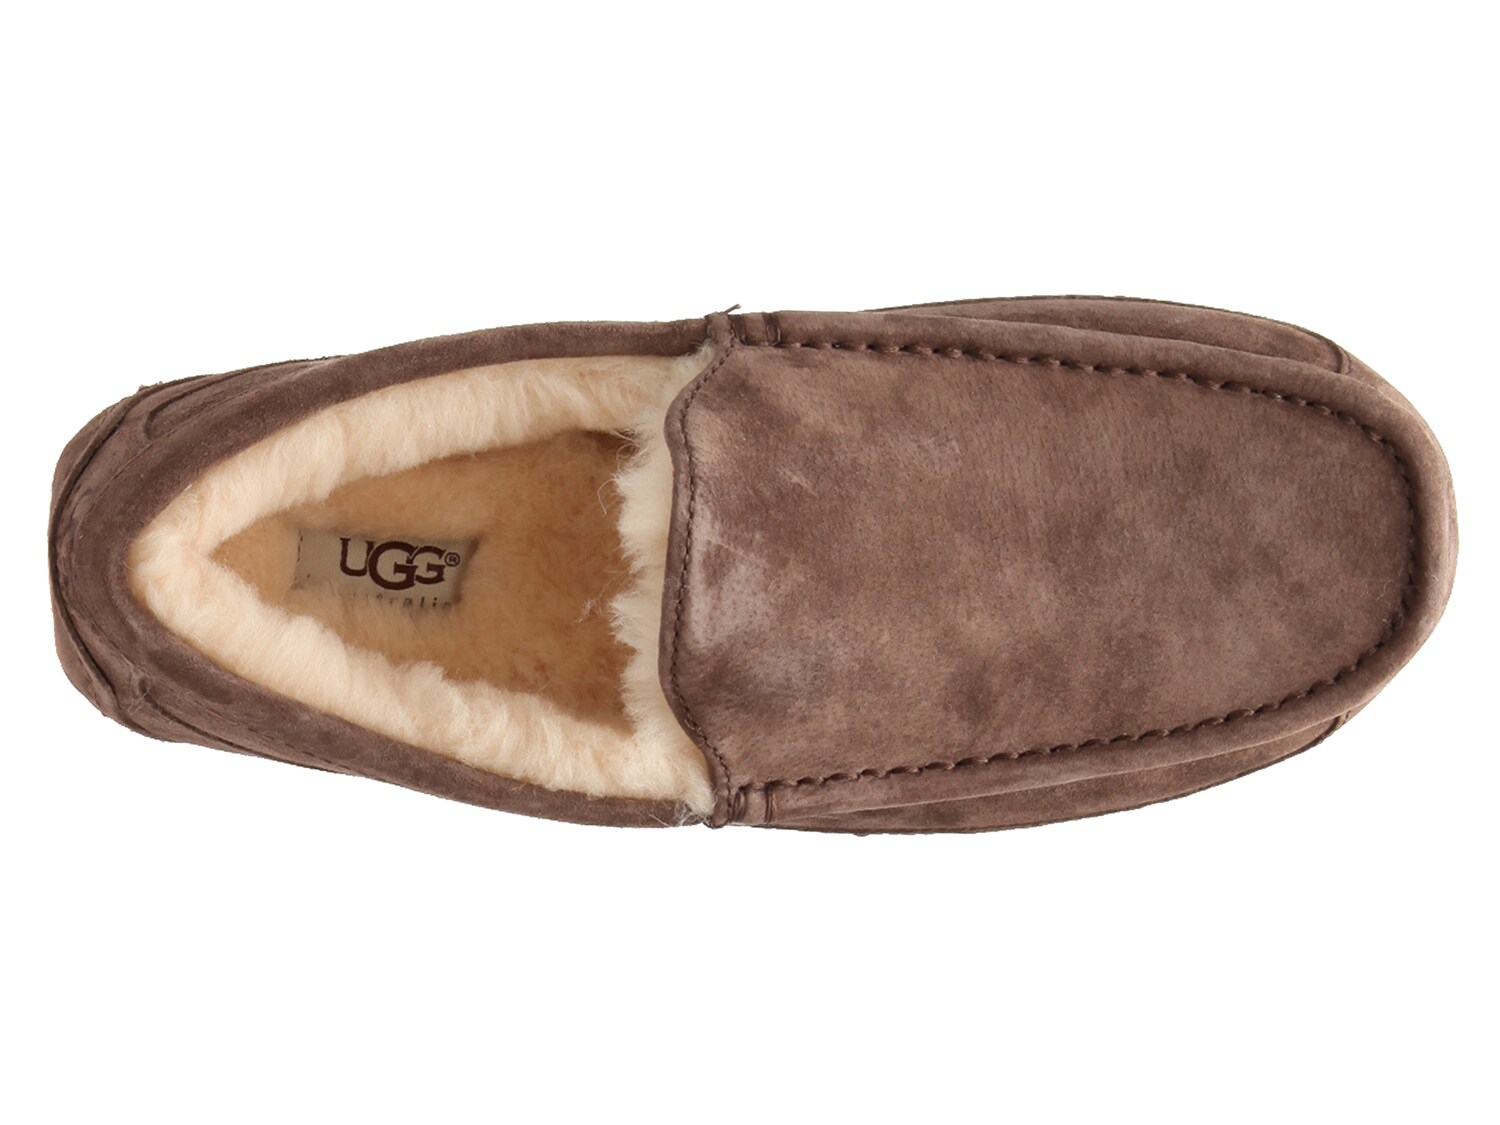 ugg slippers at dsw